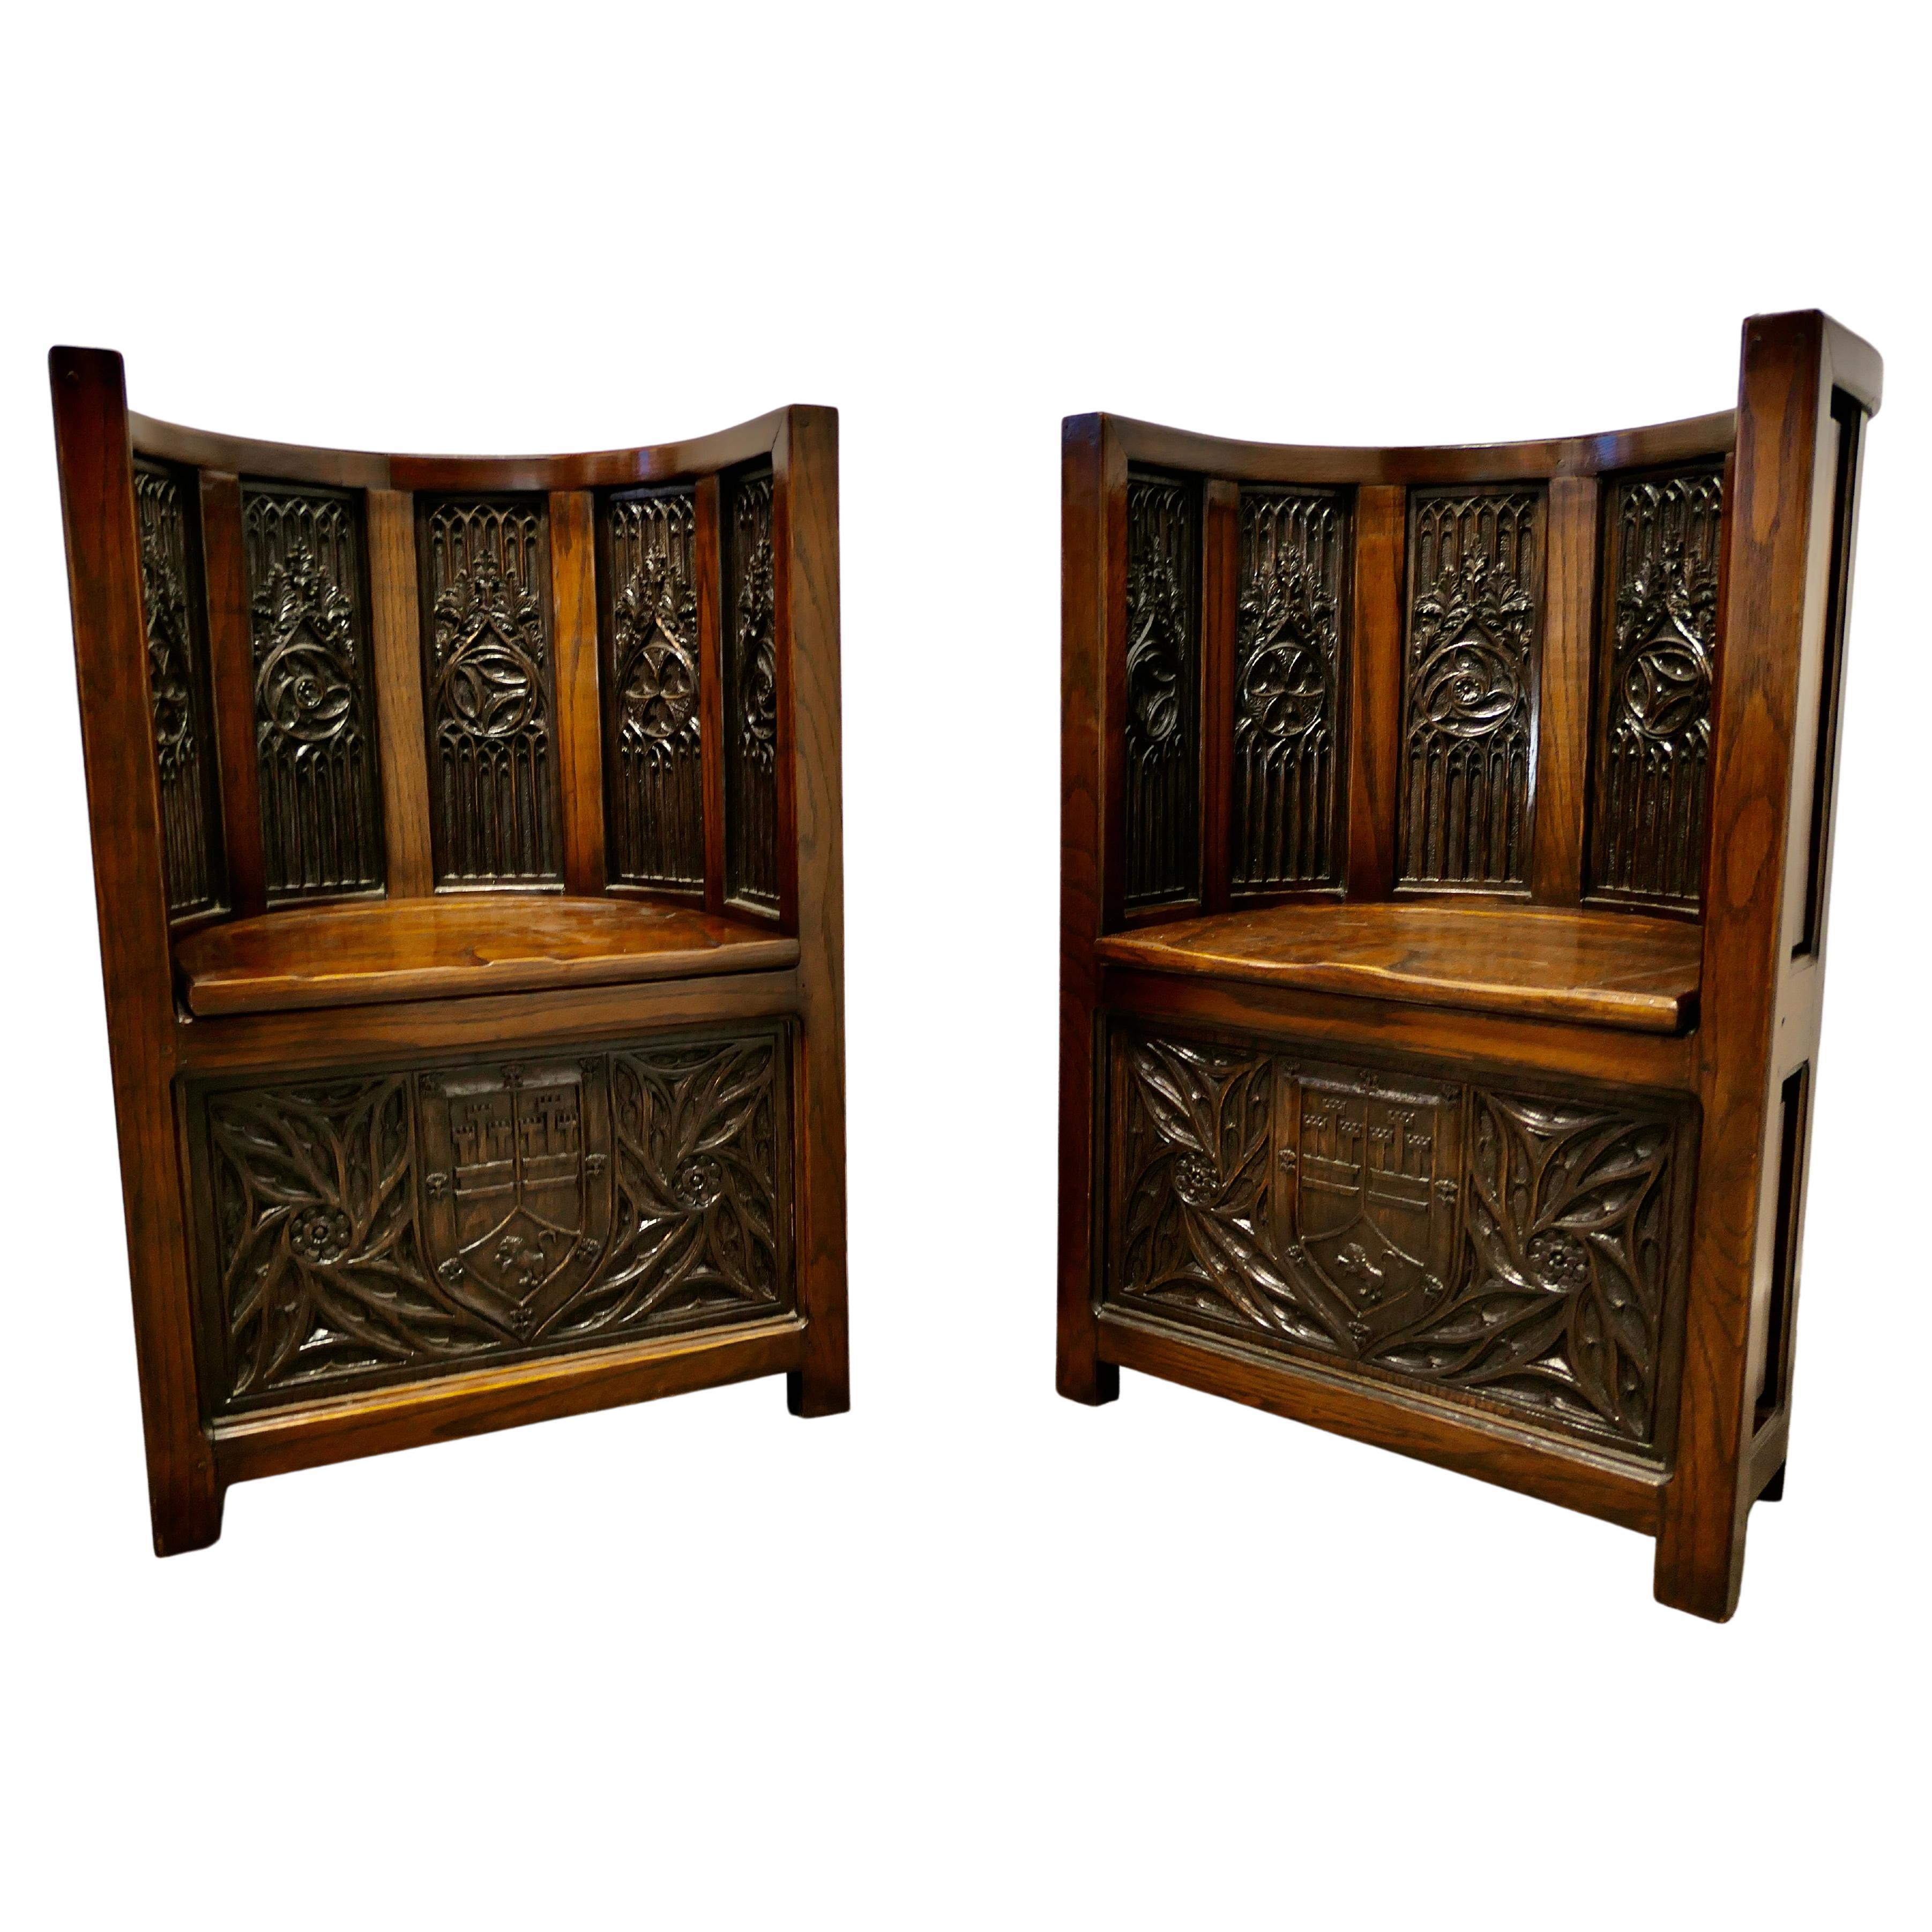 Pugin Inspired Arts and Crafts Carved Barrel Back Hall Chairs For Sale